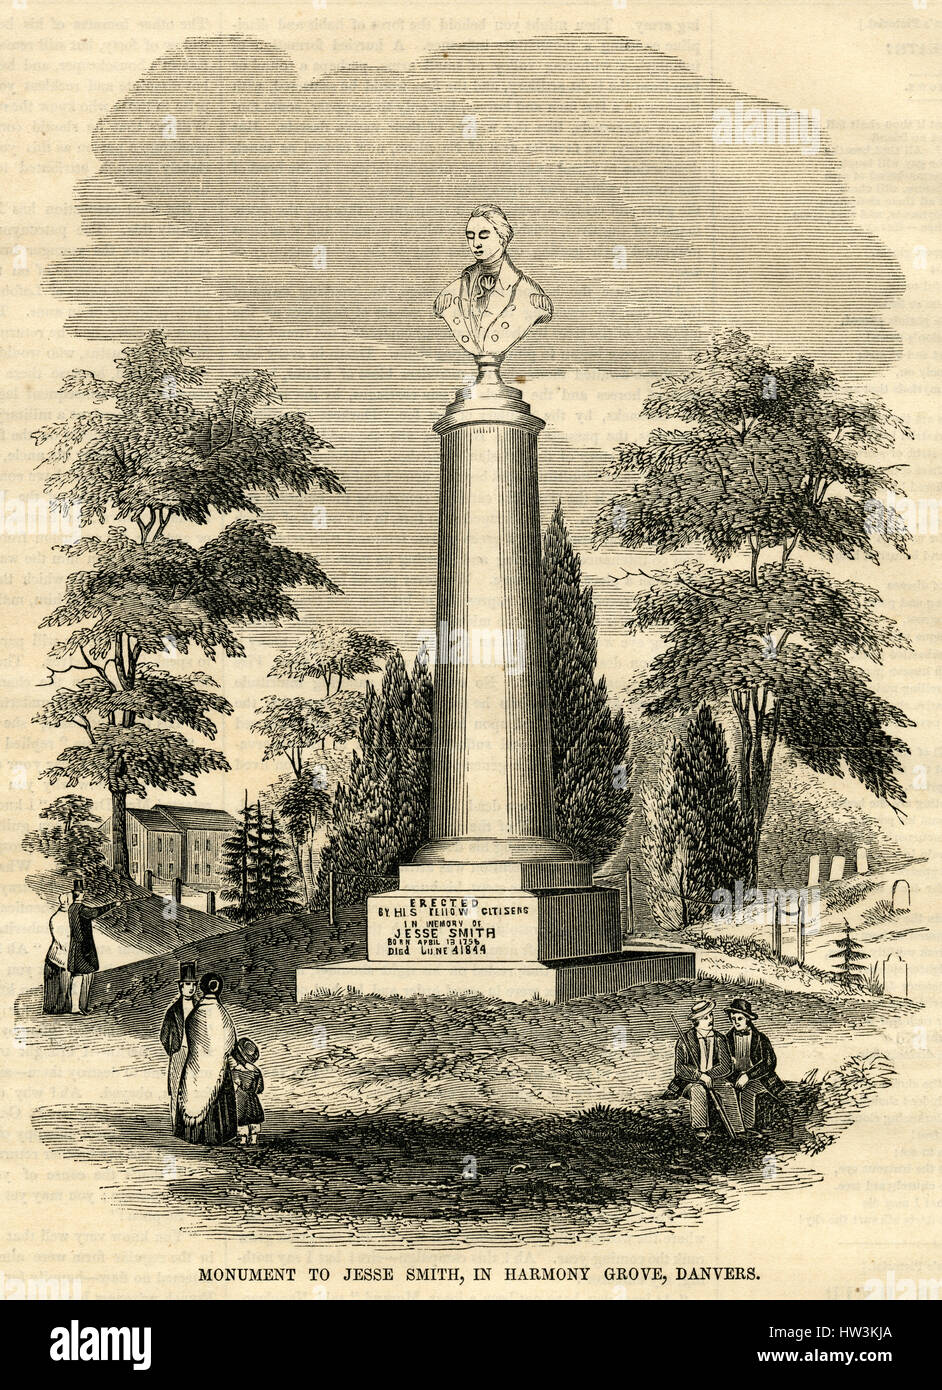 Antique 1854 engraving, "Monument to Jesse Smith in Harmony Grove, Danvers [now Salem], Massachusetts." Harmony Grove Cemetery is a cemetery in Salem, Massachusetts. It was established in 1840 and is located at 30 Grove Street. SOURCE: ORIGINAL ENGRAVING. Stock Photo